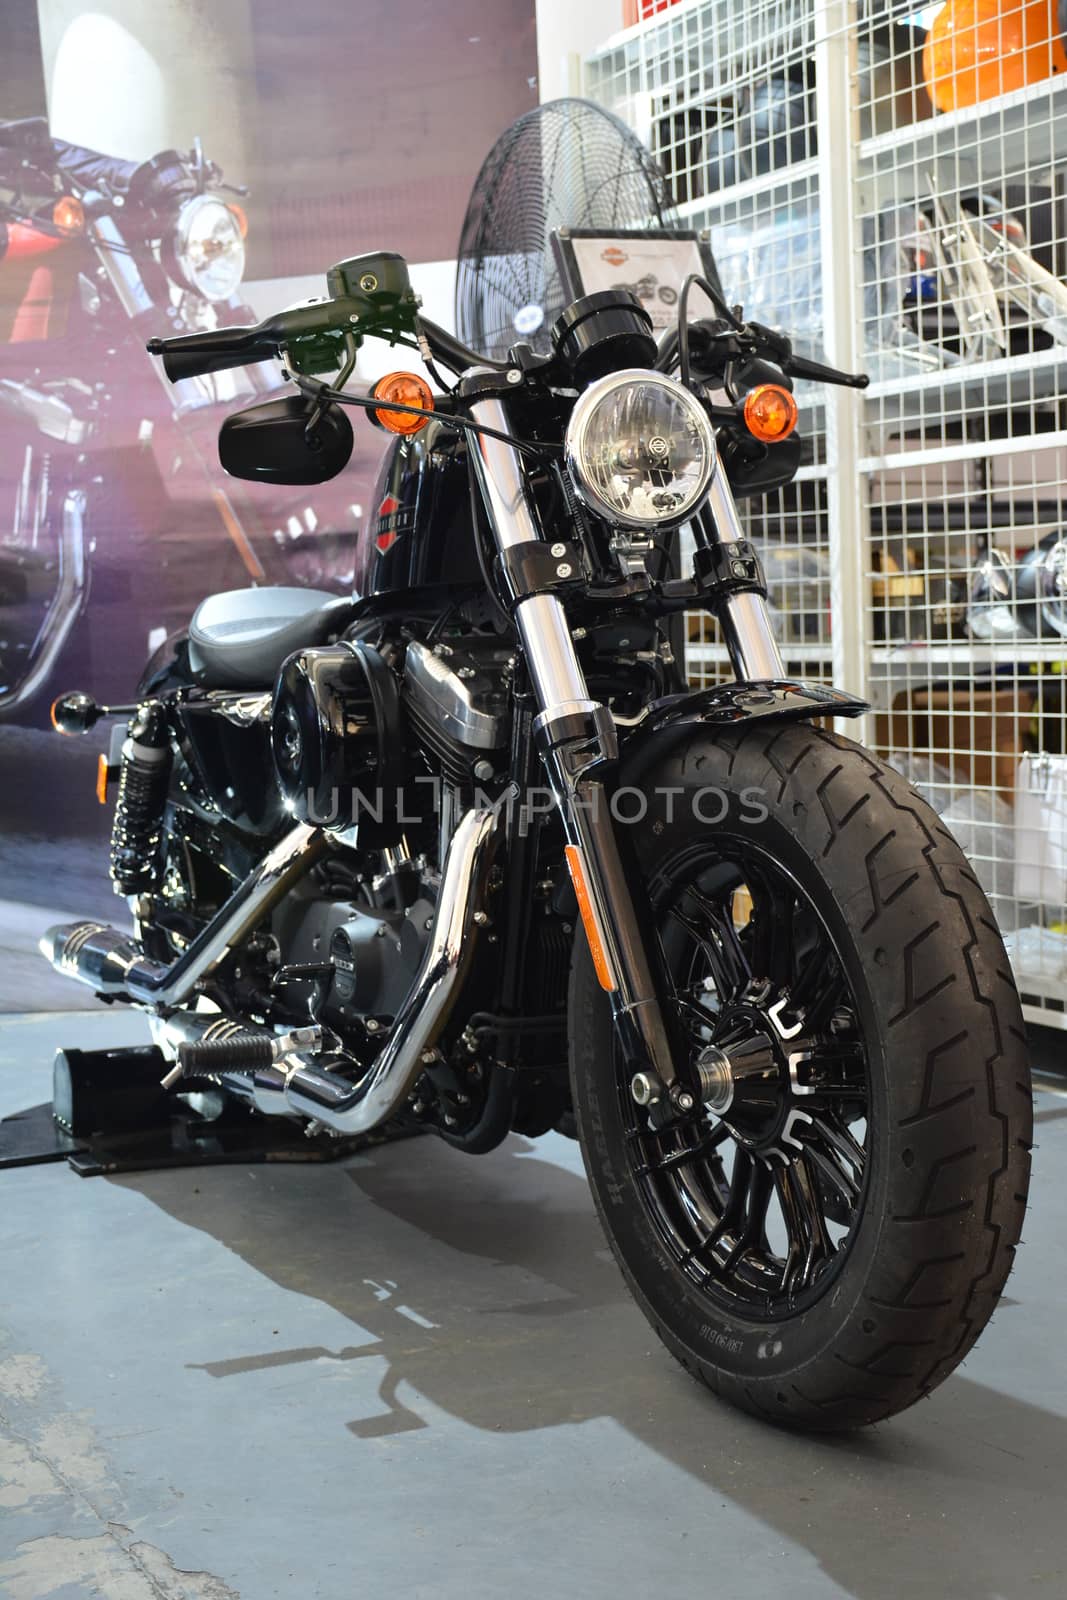 PASIG, PH - MAR. 7: Harley Davidson 2020 Sportster Forty-Eight motorcycle at 2nd Ride Ph on March 7, 2020 in Pasig, Philippines. Ride Ph is a motorcycle exhibit in the Philippines.